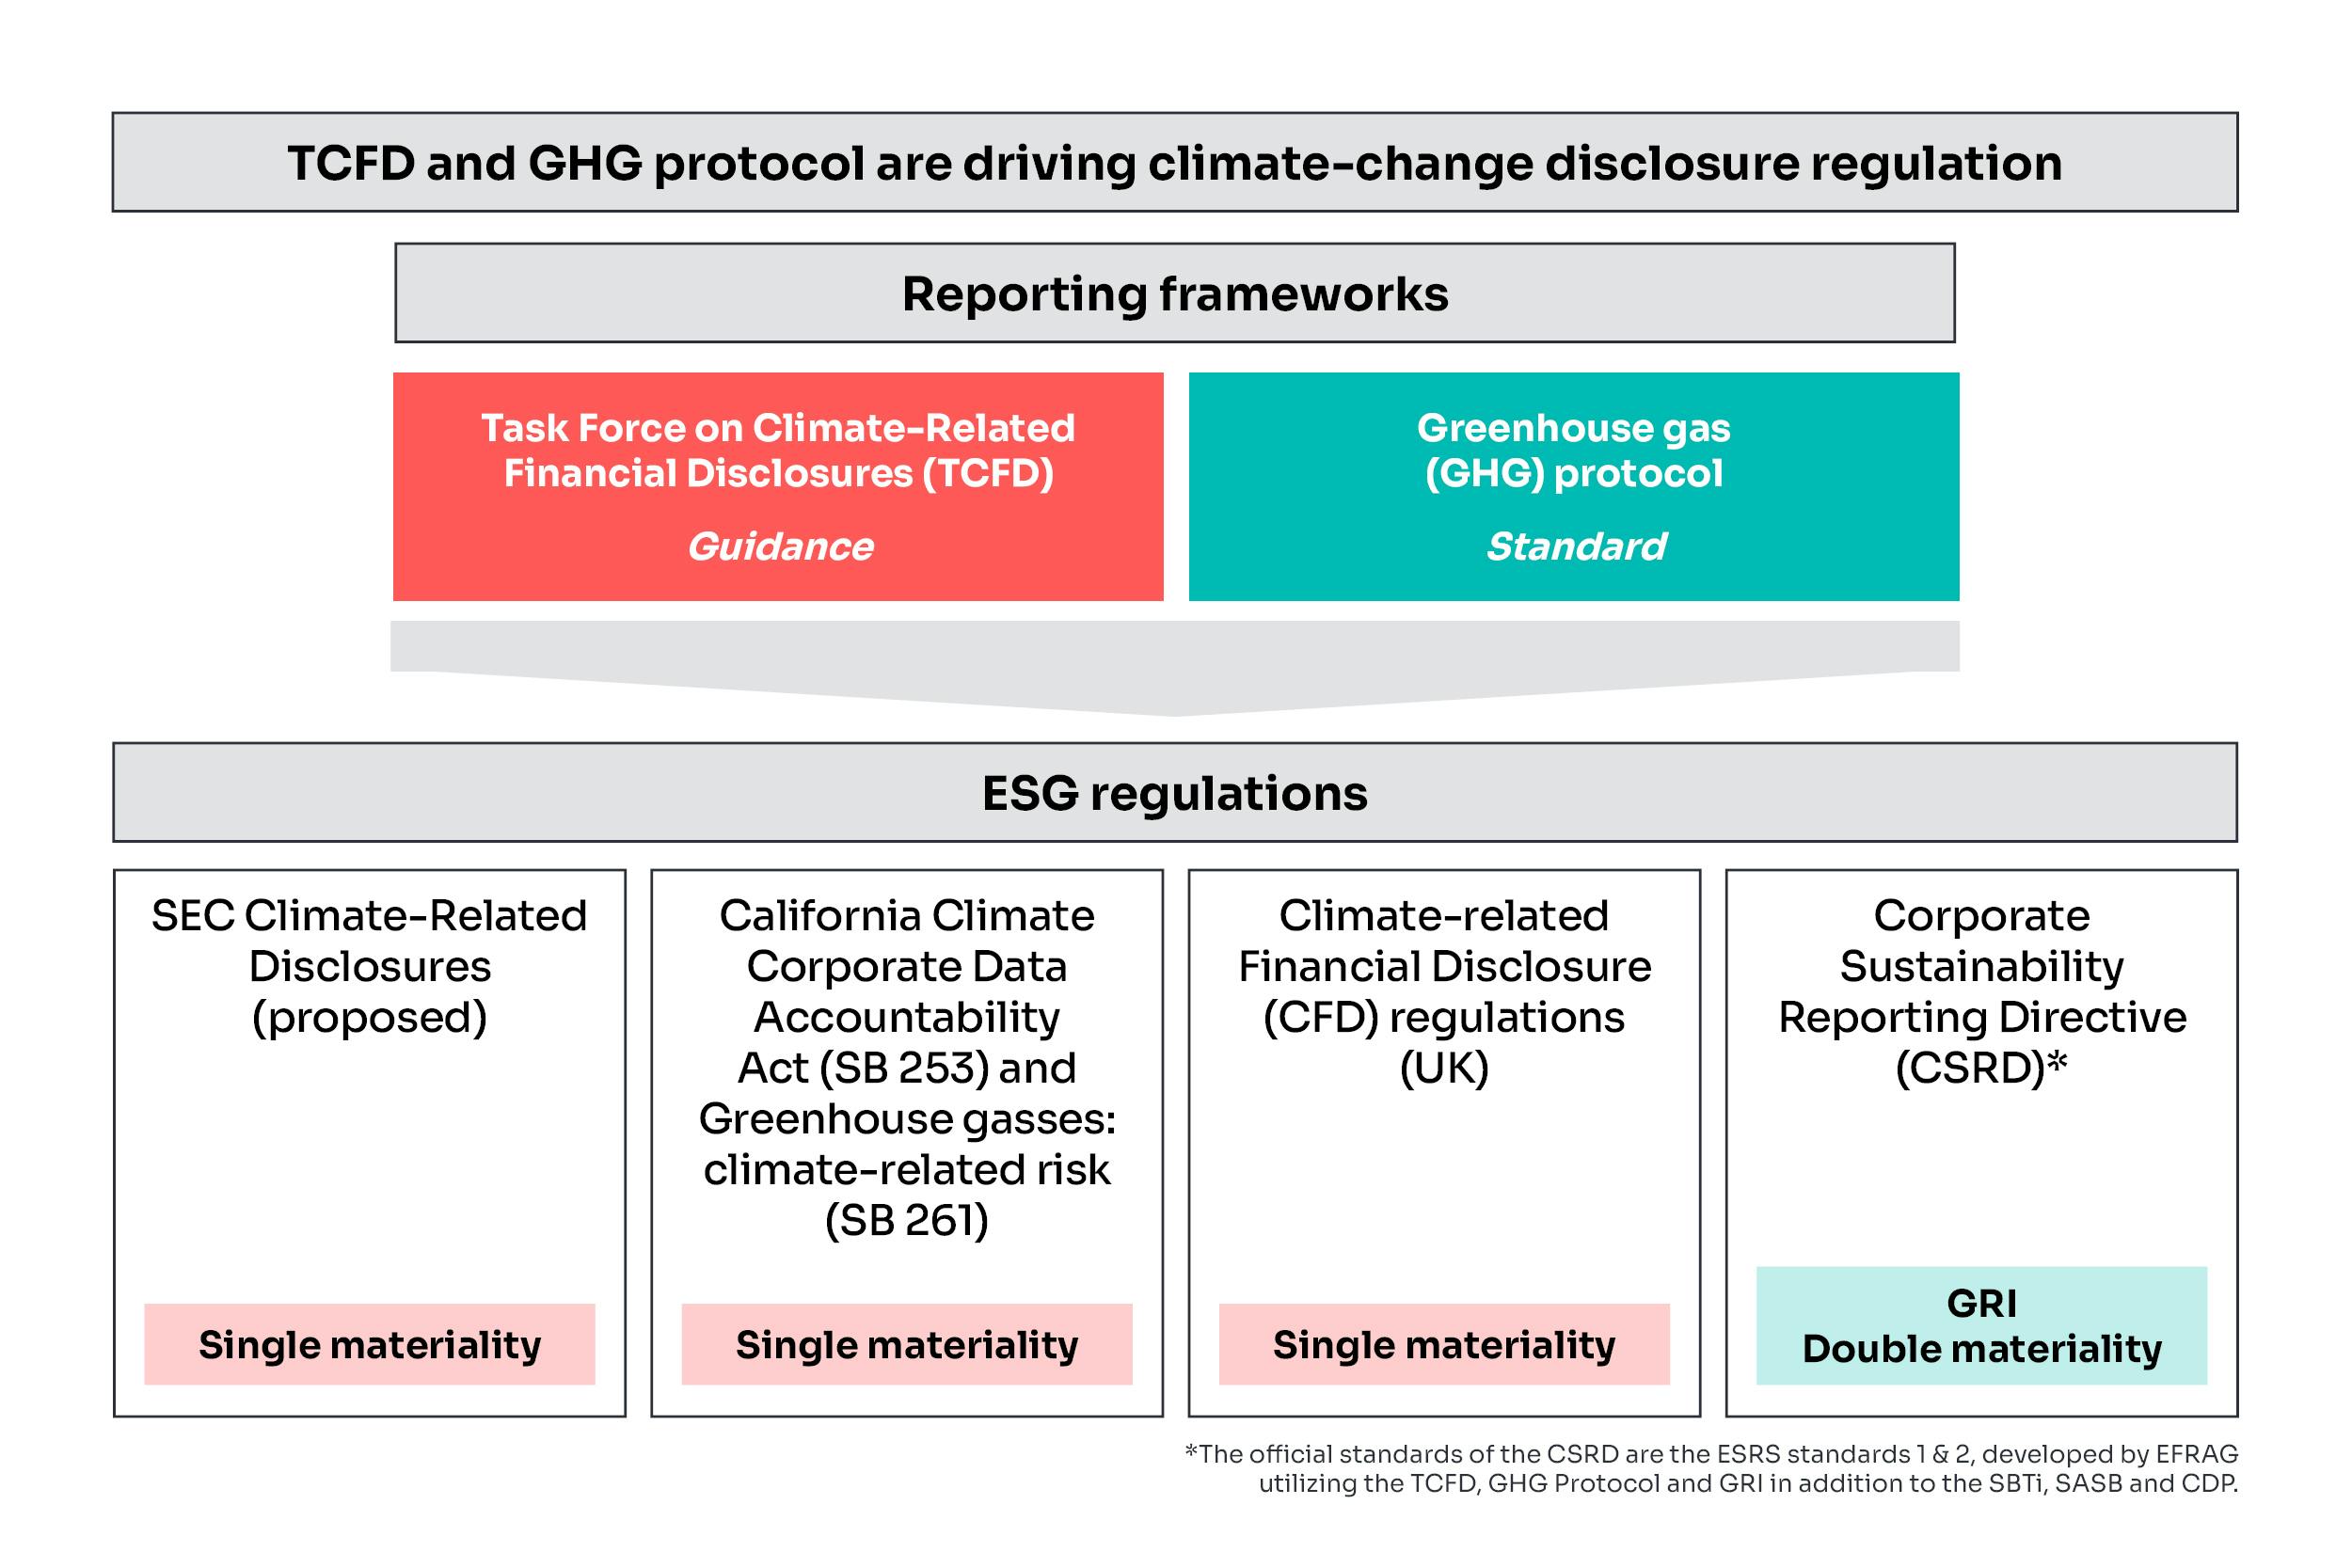 TCFD and GHG protocol are driving climate-change disclosure regulation